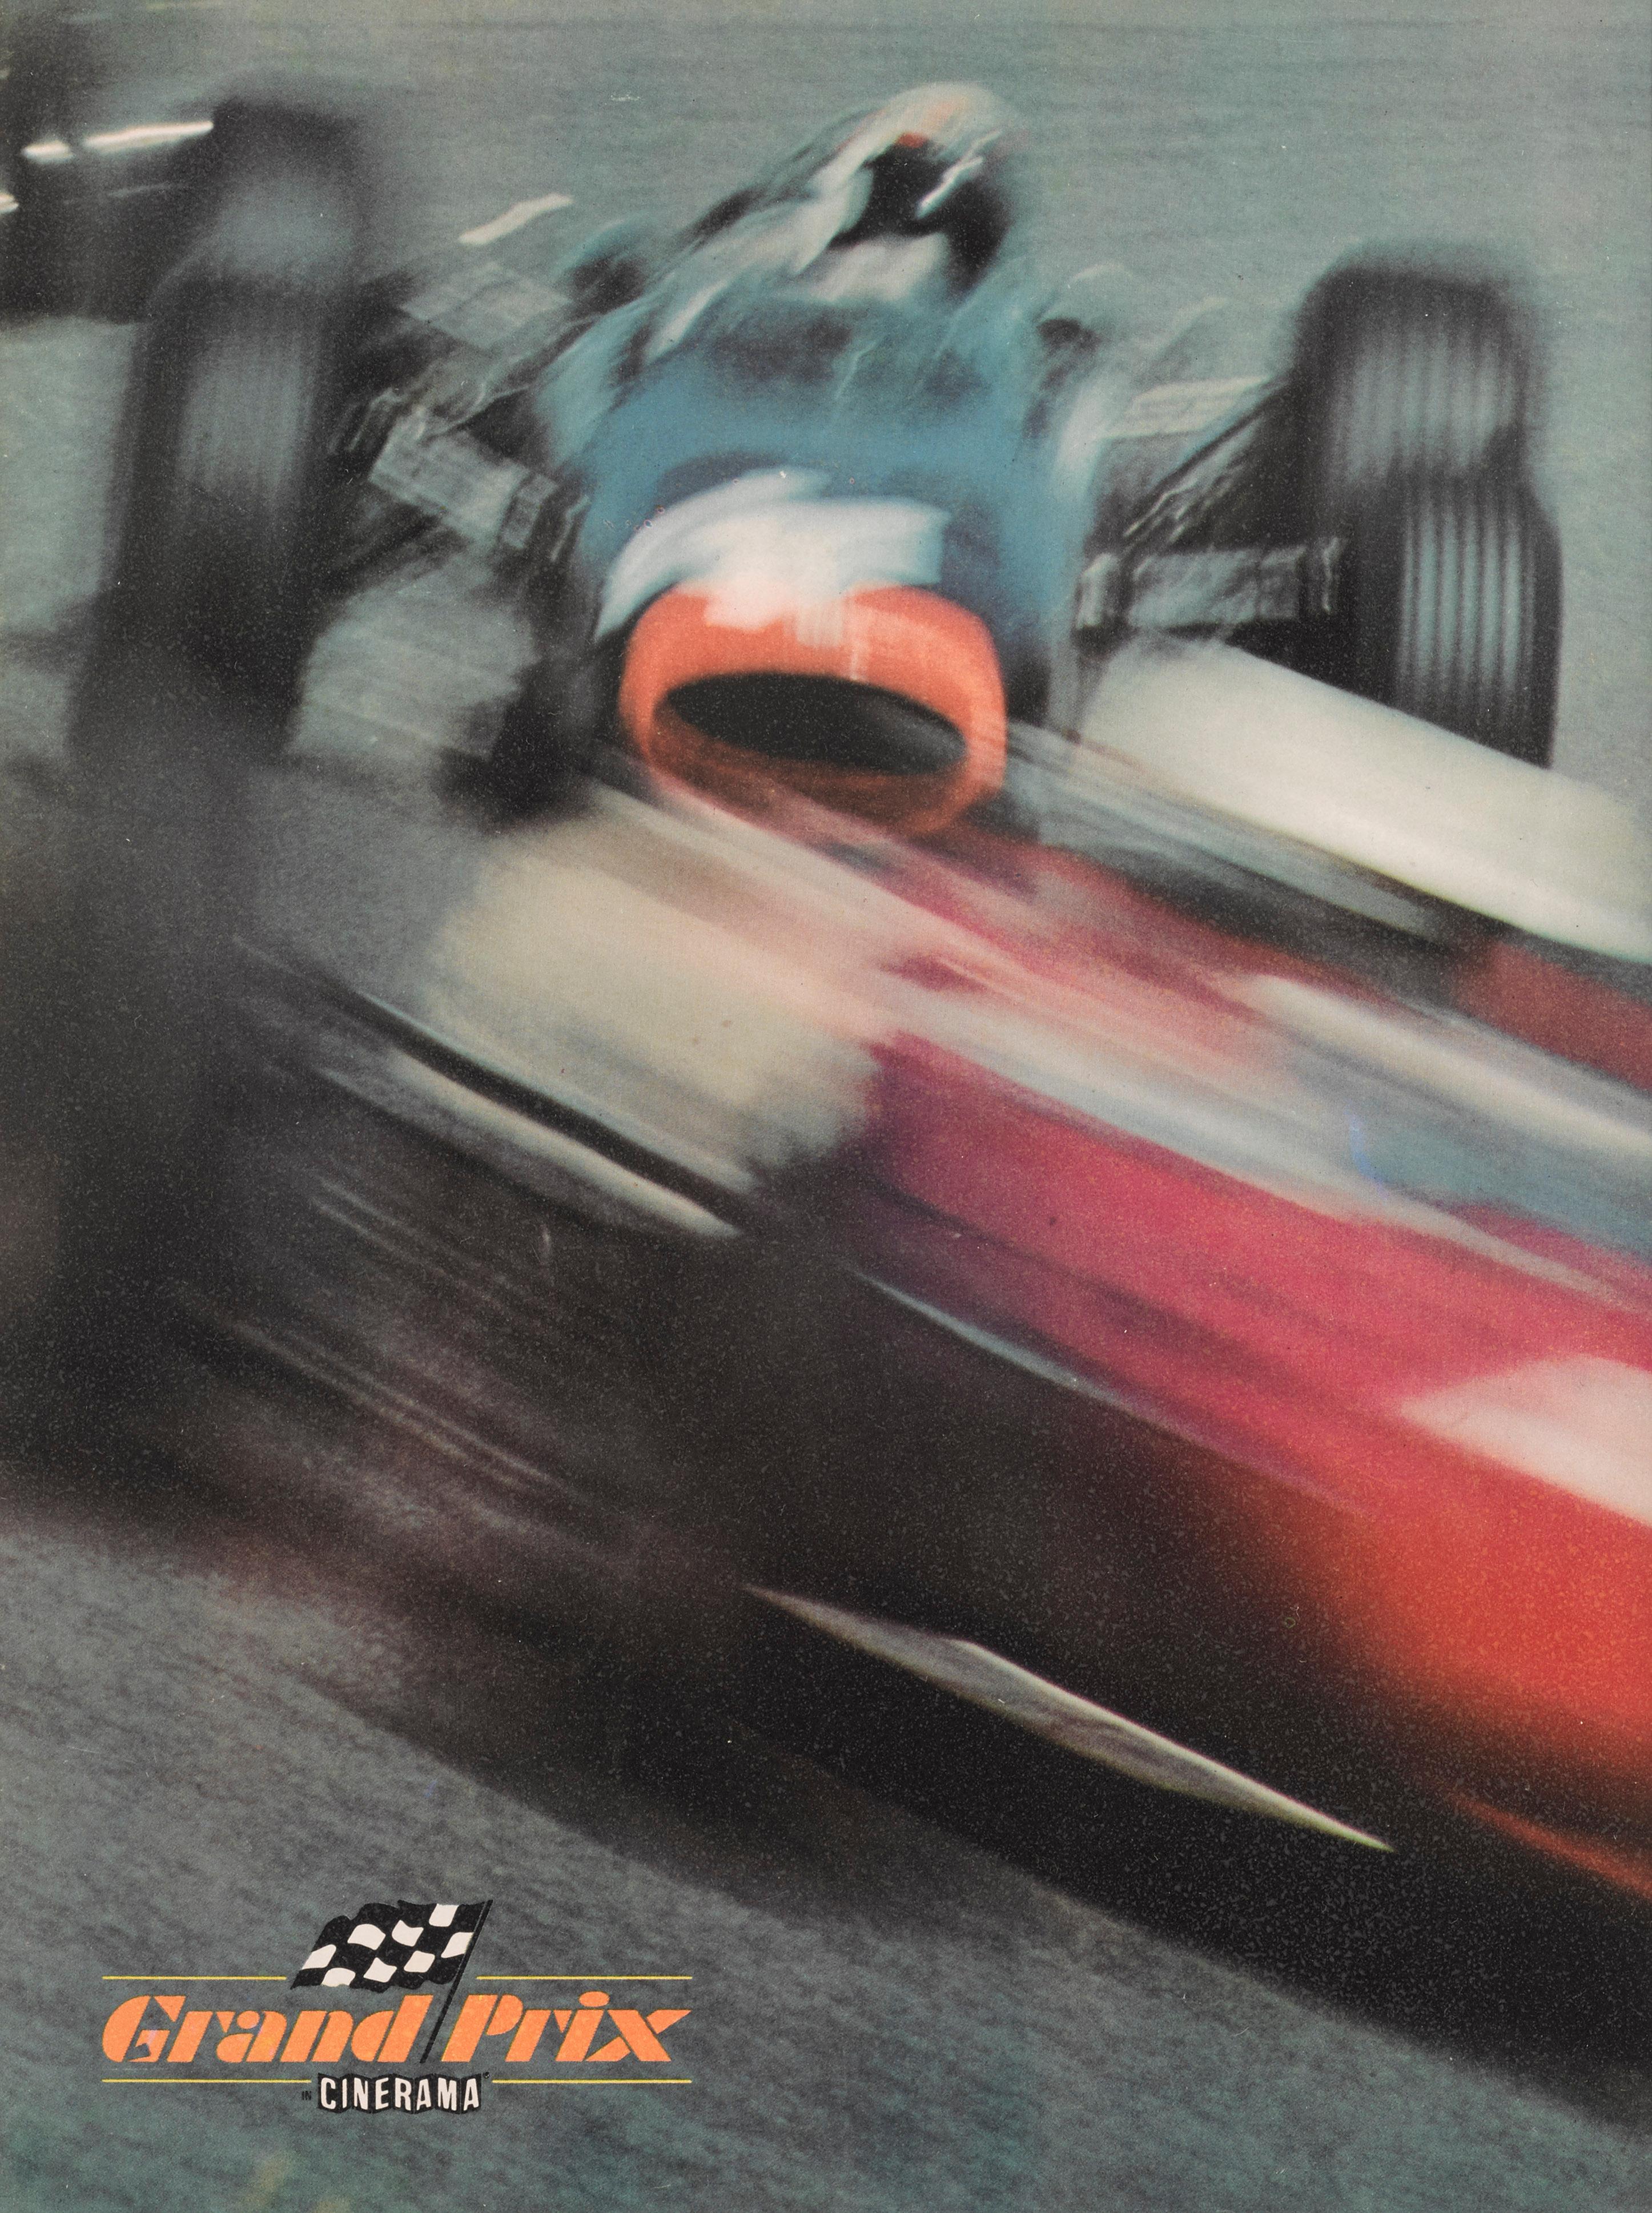 Original British Cinerama souvenir program cover.
This fictional popular motor racing film is the story of the 1966 Formula One season through the eyes of four Formula One drivers the film includes real-life motor racing footage and cameos by